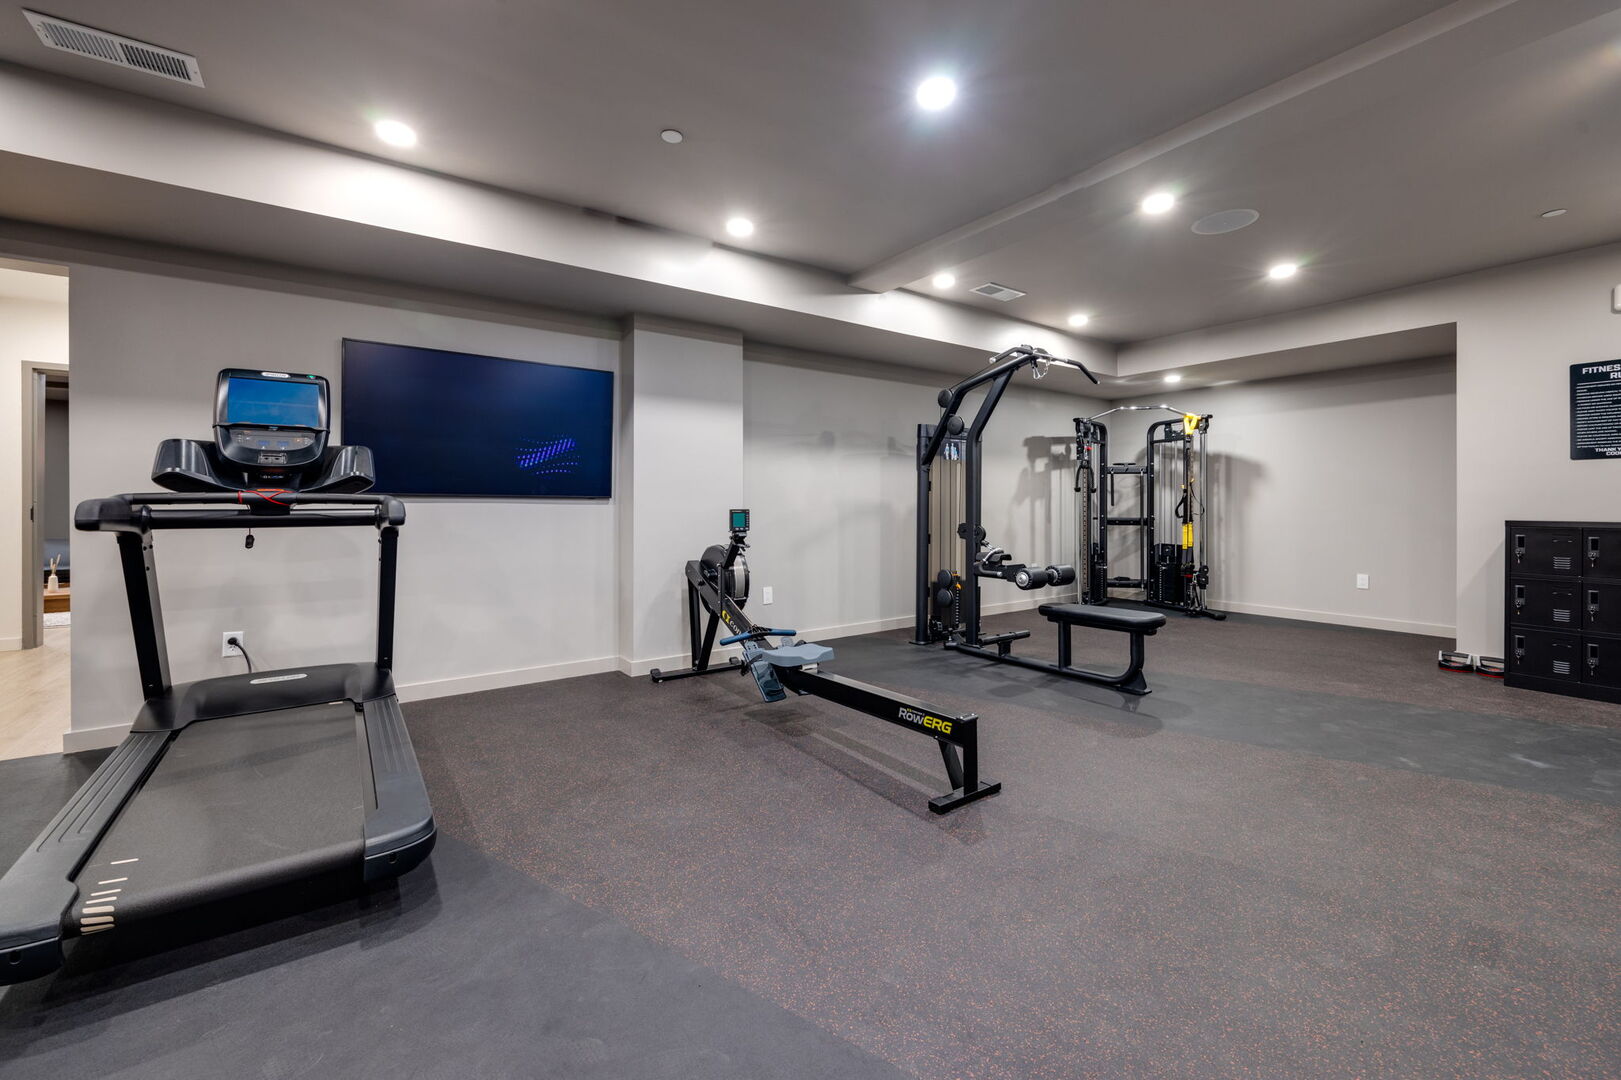 Communal Area: Gym offering a wide range of workout equipment and a Smart TV.